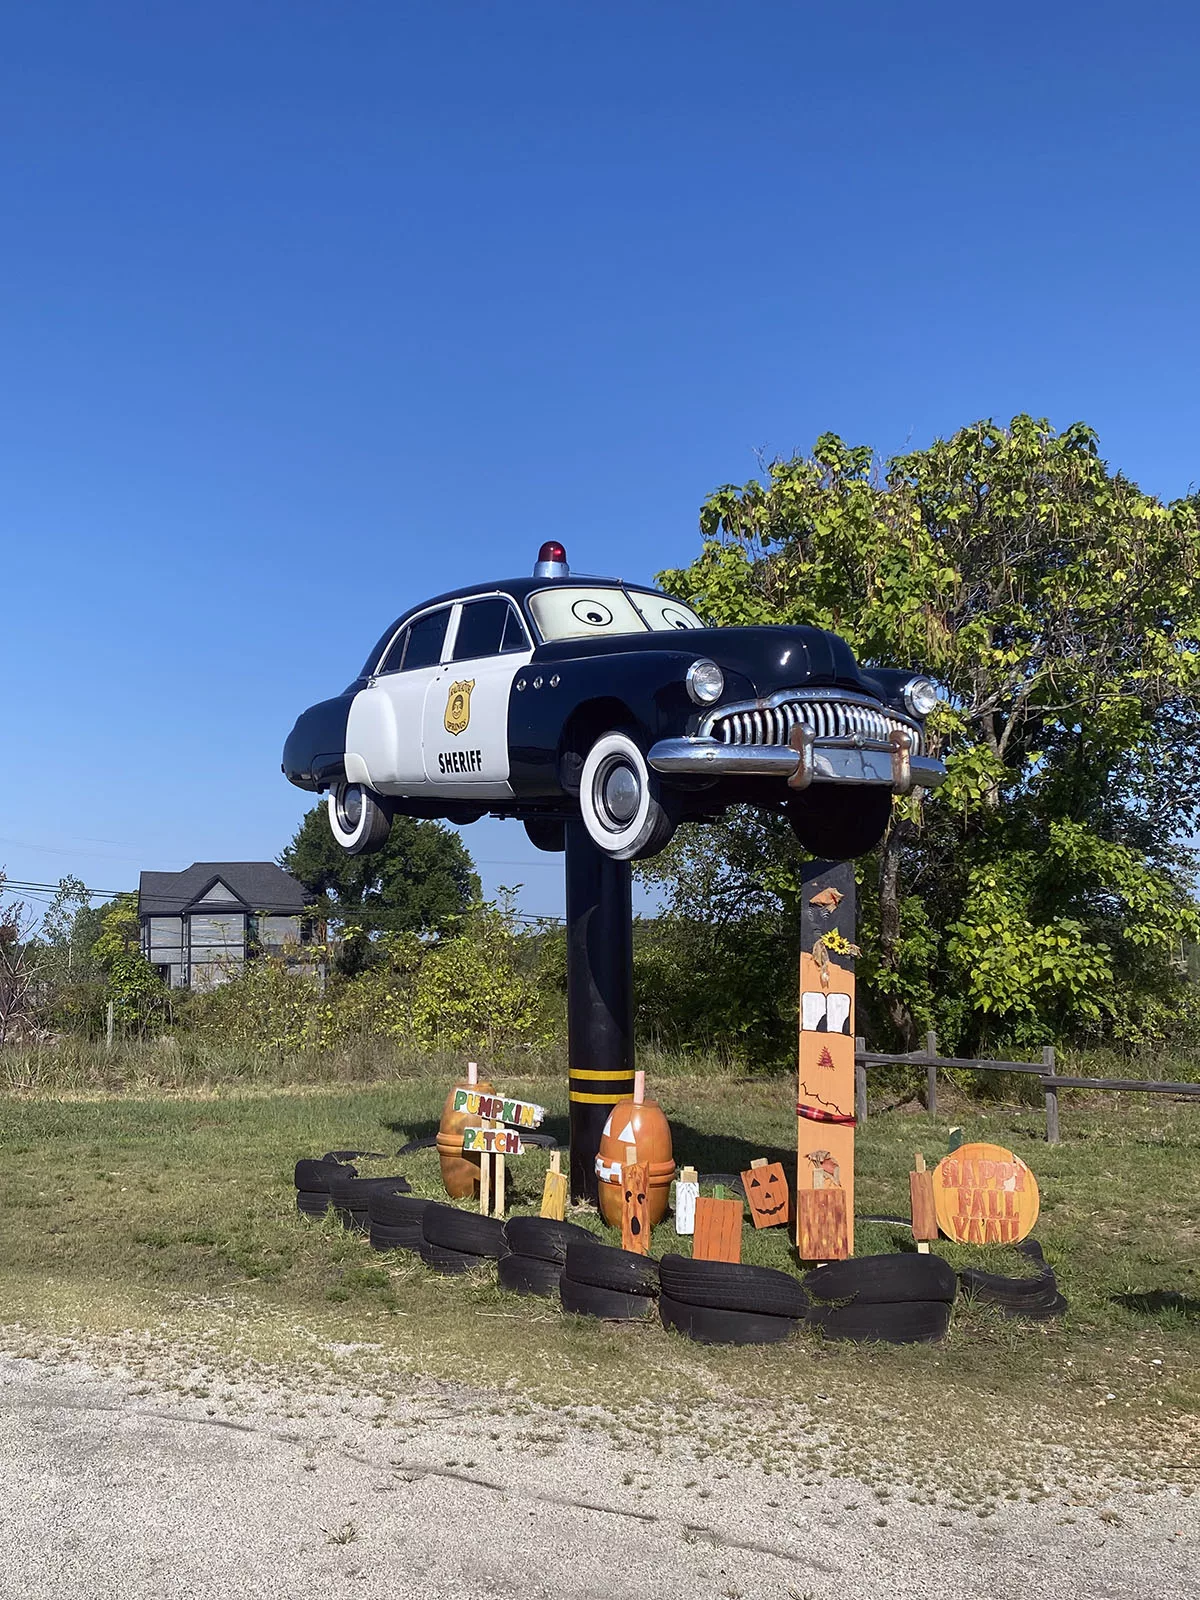 Replica of the Sheriff from the Pixar movie "Cars" at Luigi's Pit Stop in Galena, Kansas